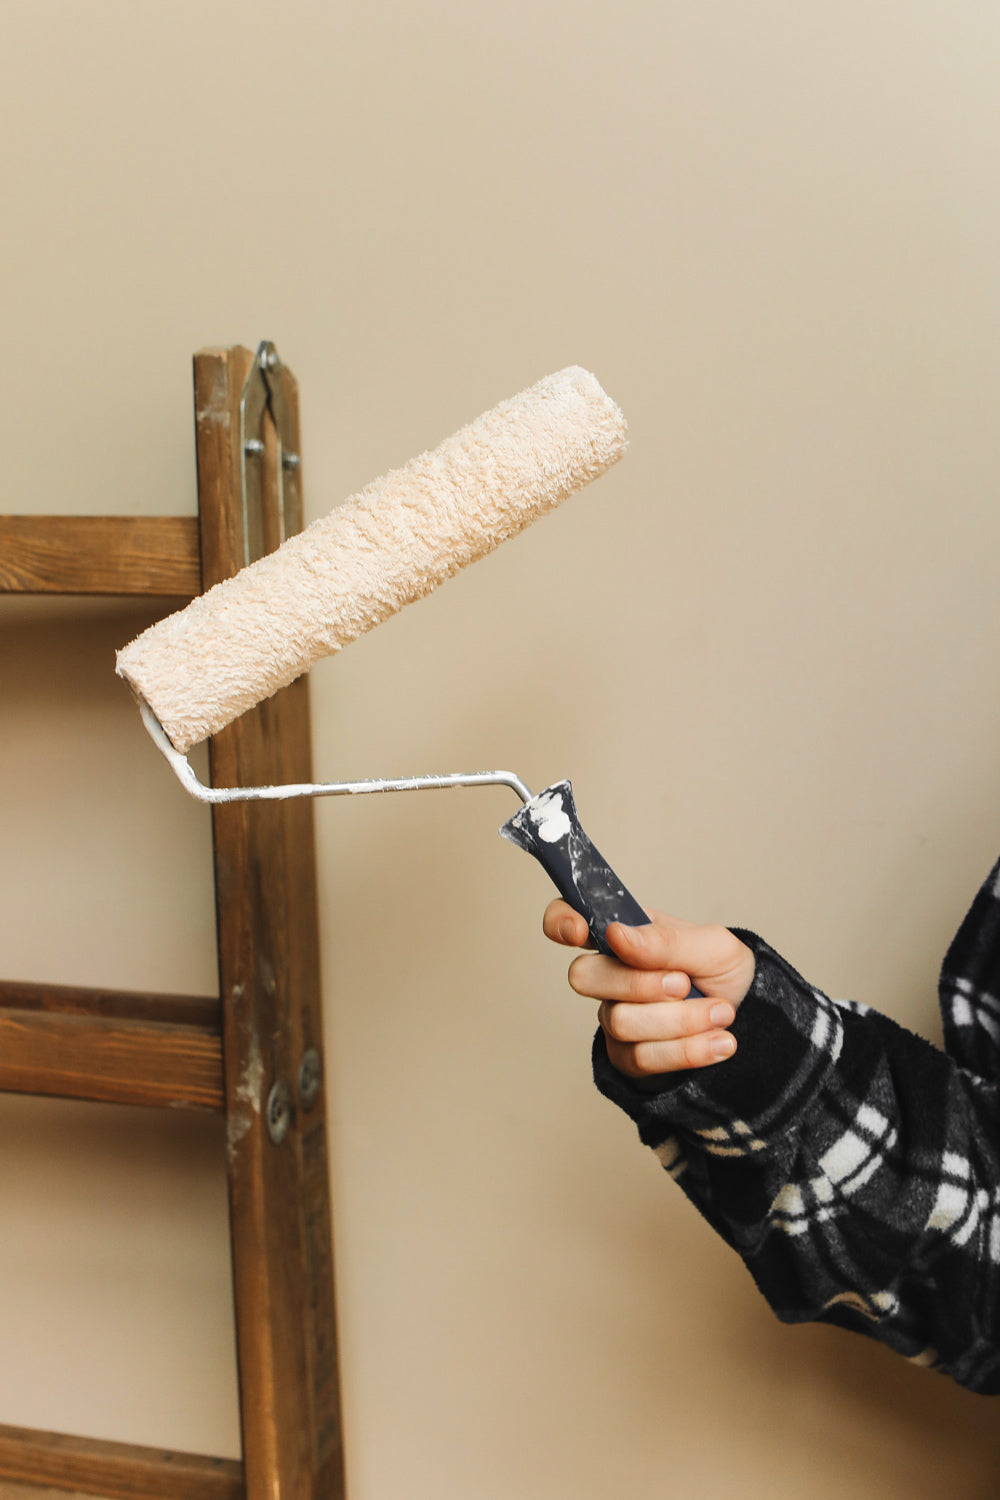 can you paint over wallpaper glue